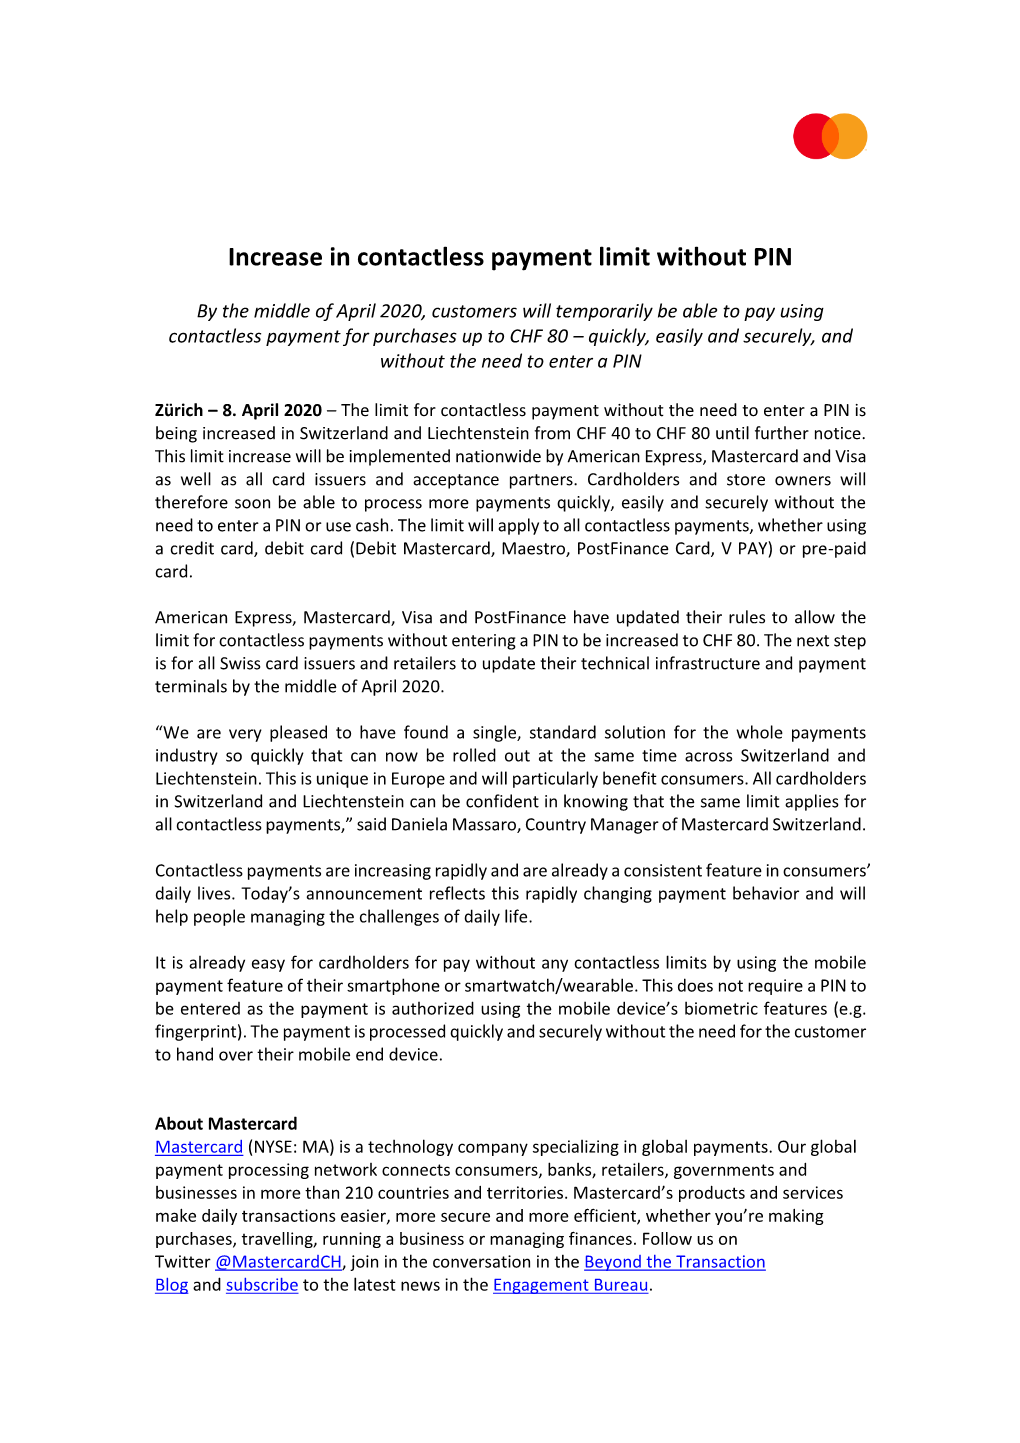 Increase in Contactless Payment Limit Without PIN